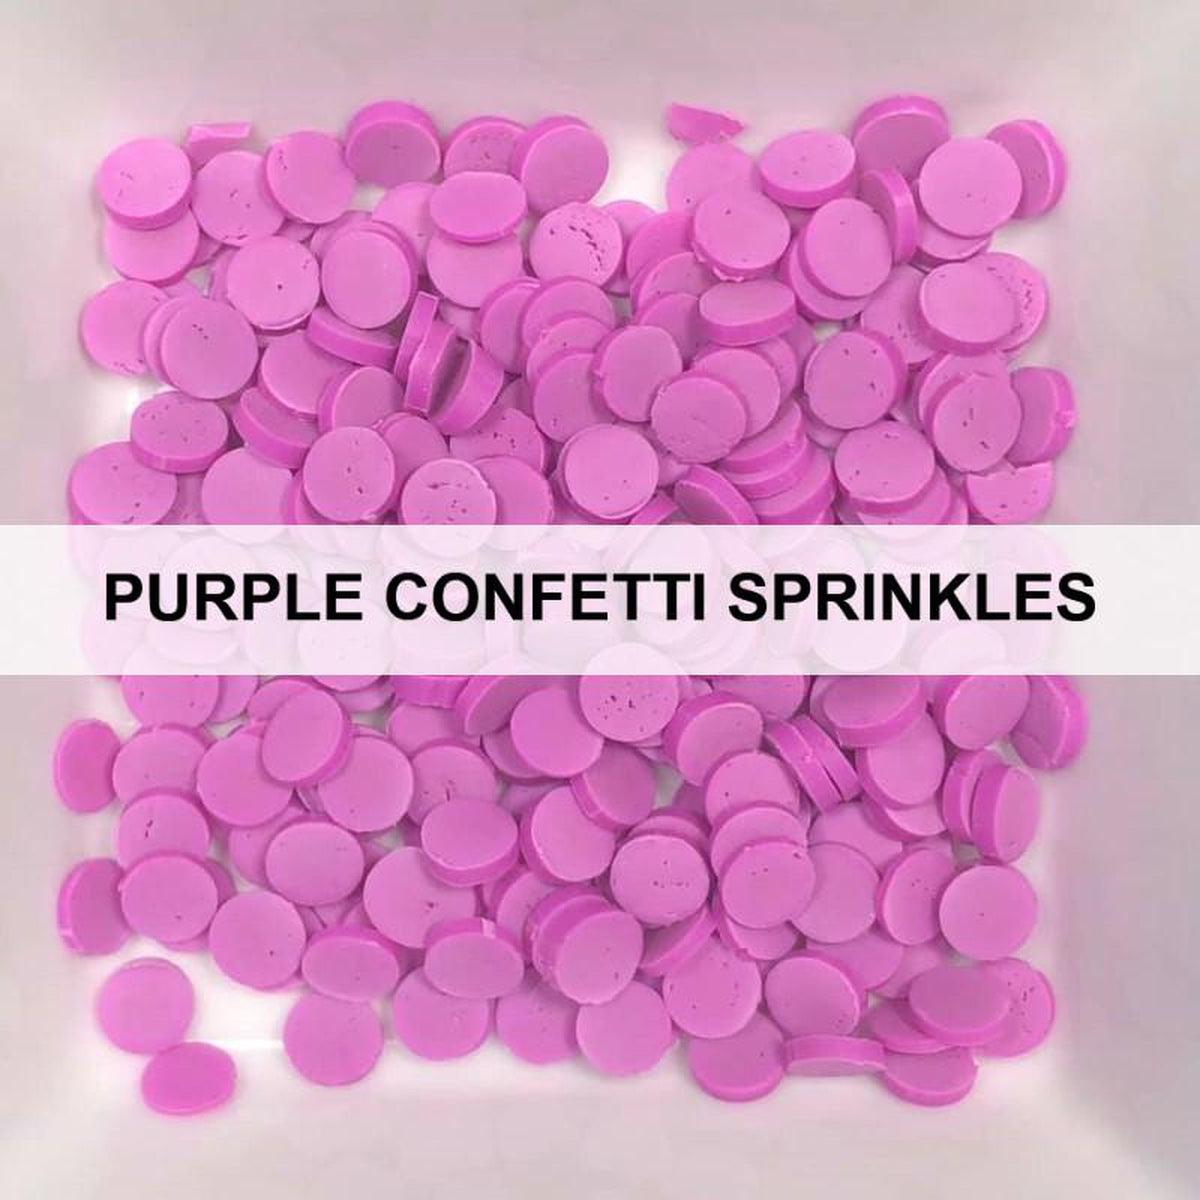 Purple Confetti Sprinkles by Kat Scrappiness - Kat Scrappiness